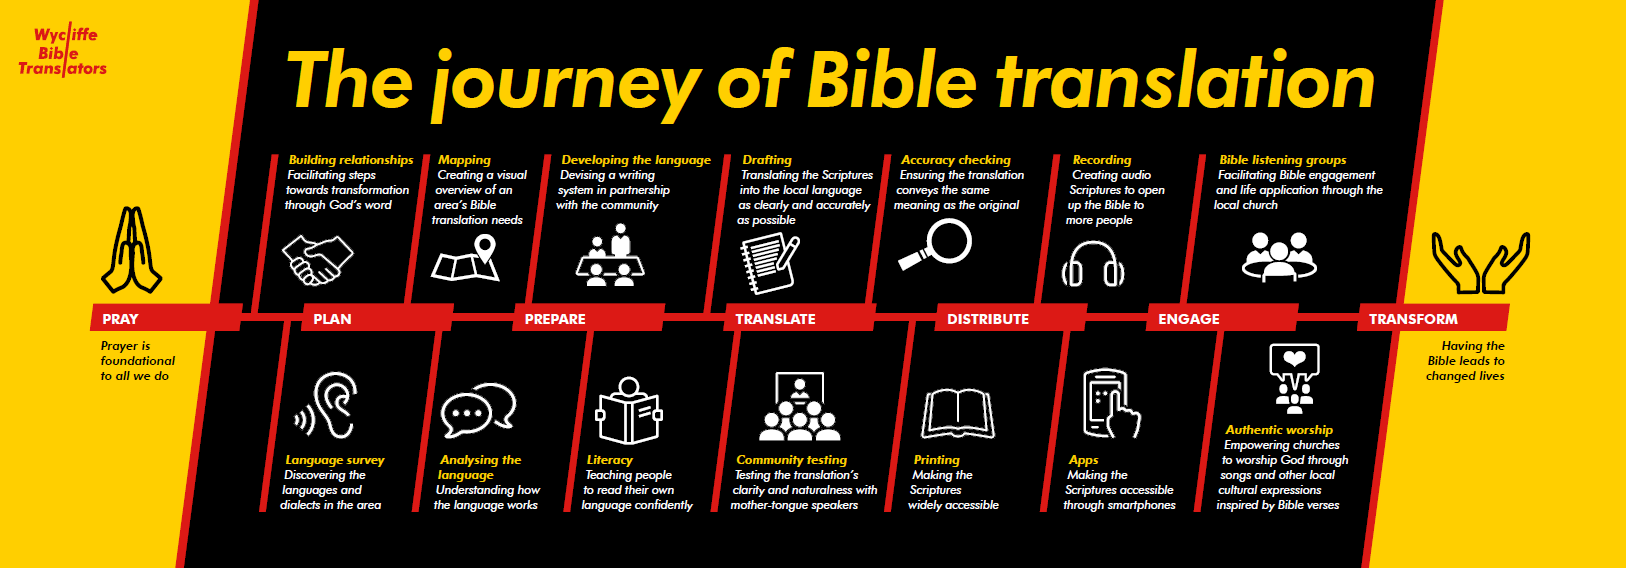 The journey of Bible translation includes many steps, from building relationships to transformation as people get to know Jesus through the Bible in their own languages. Mapping is important from the very earliest stages of a Bible translation project.